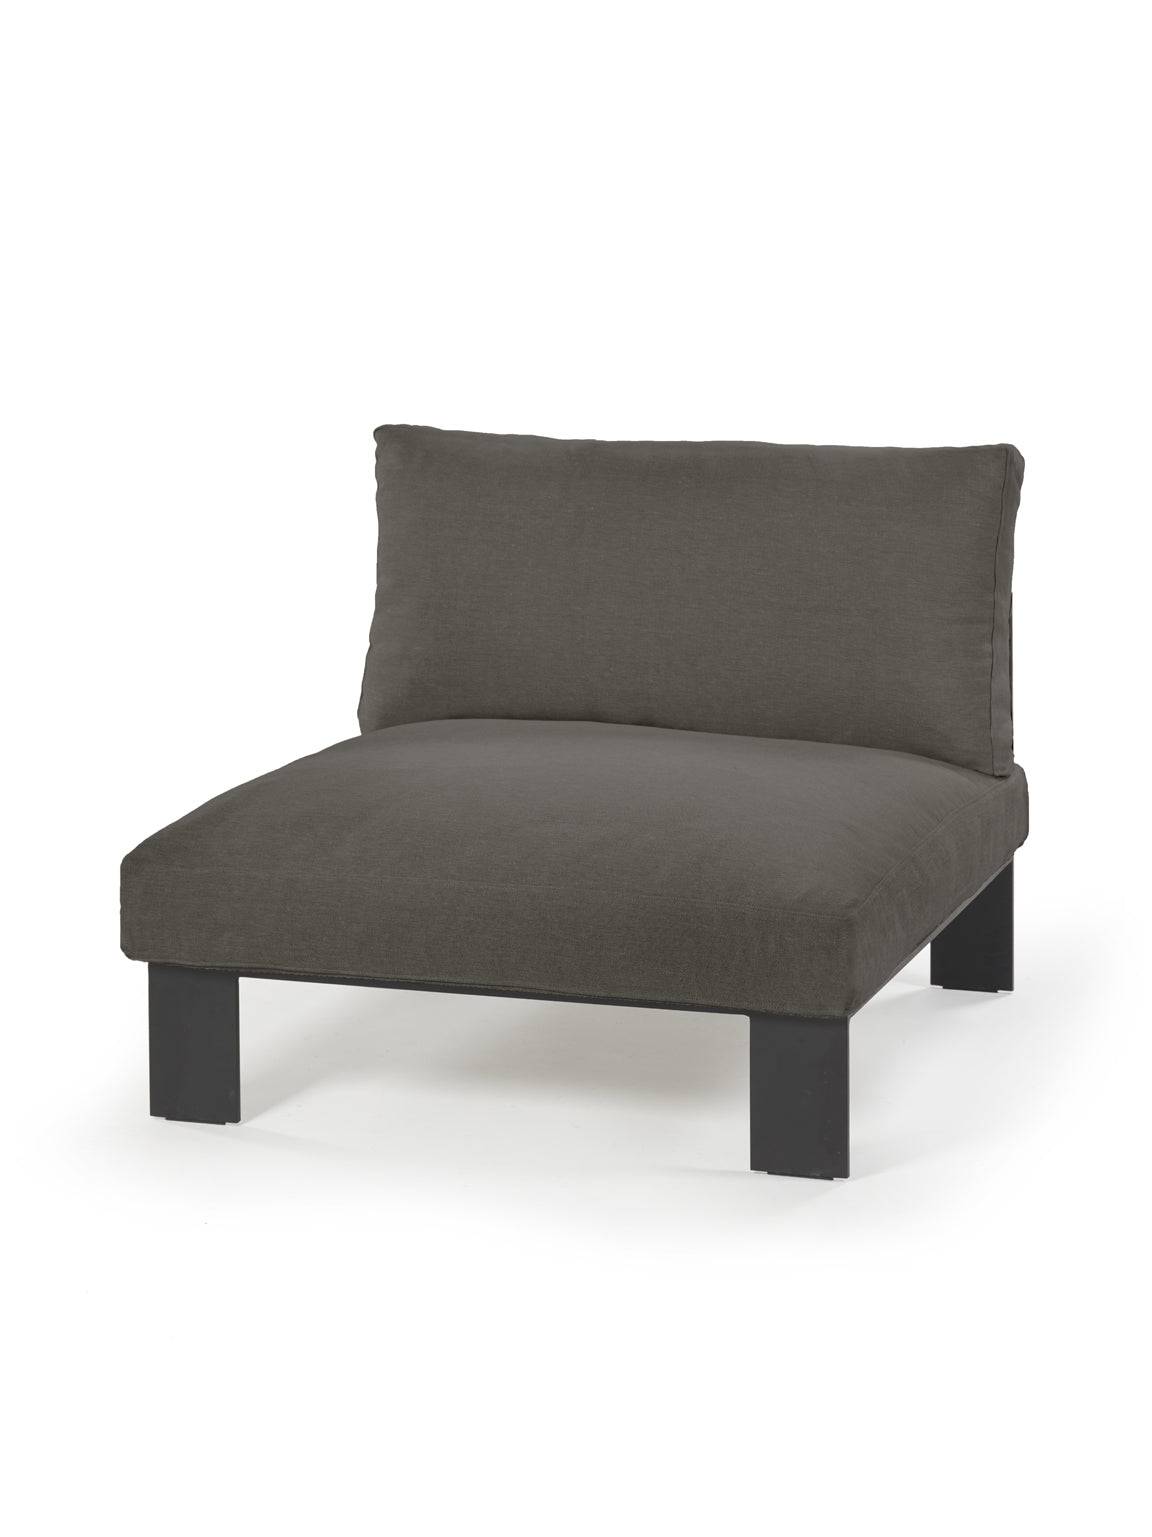 Mombaers Lounge Chair - Charcoal - THAT COOL LIVING